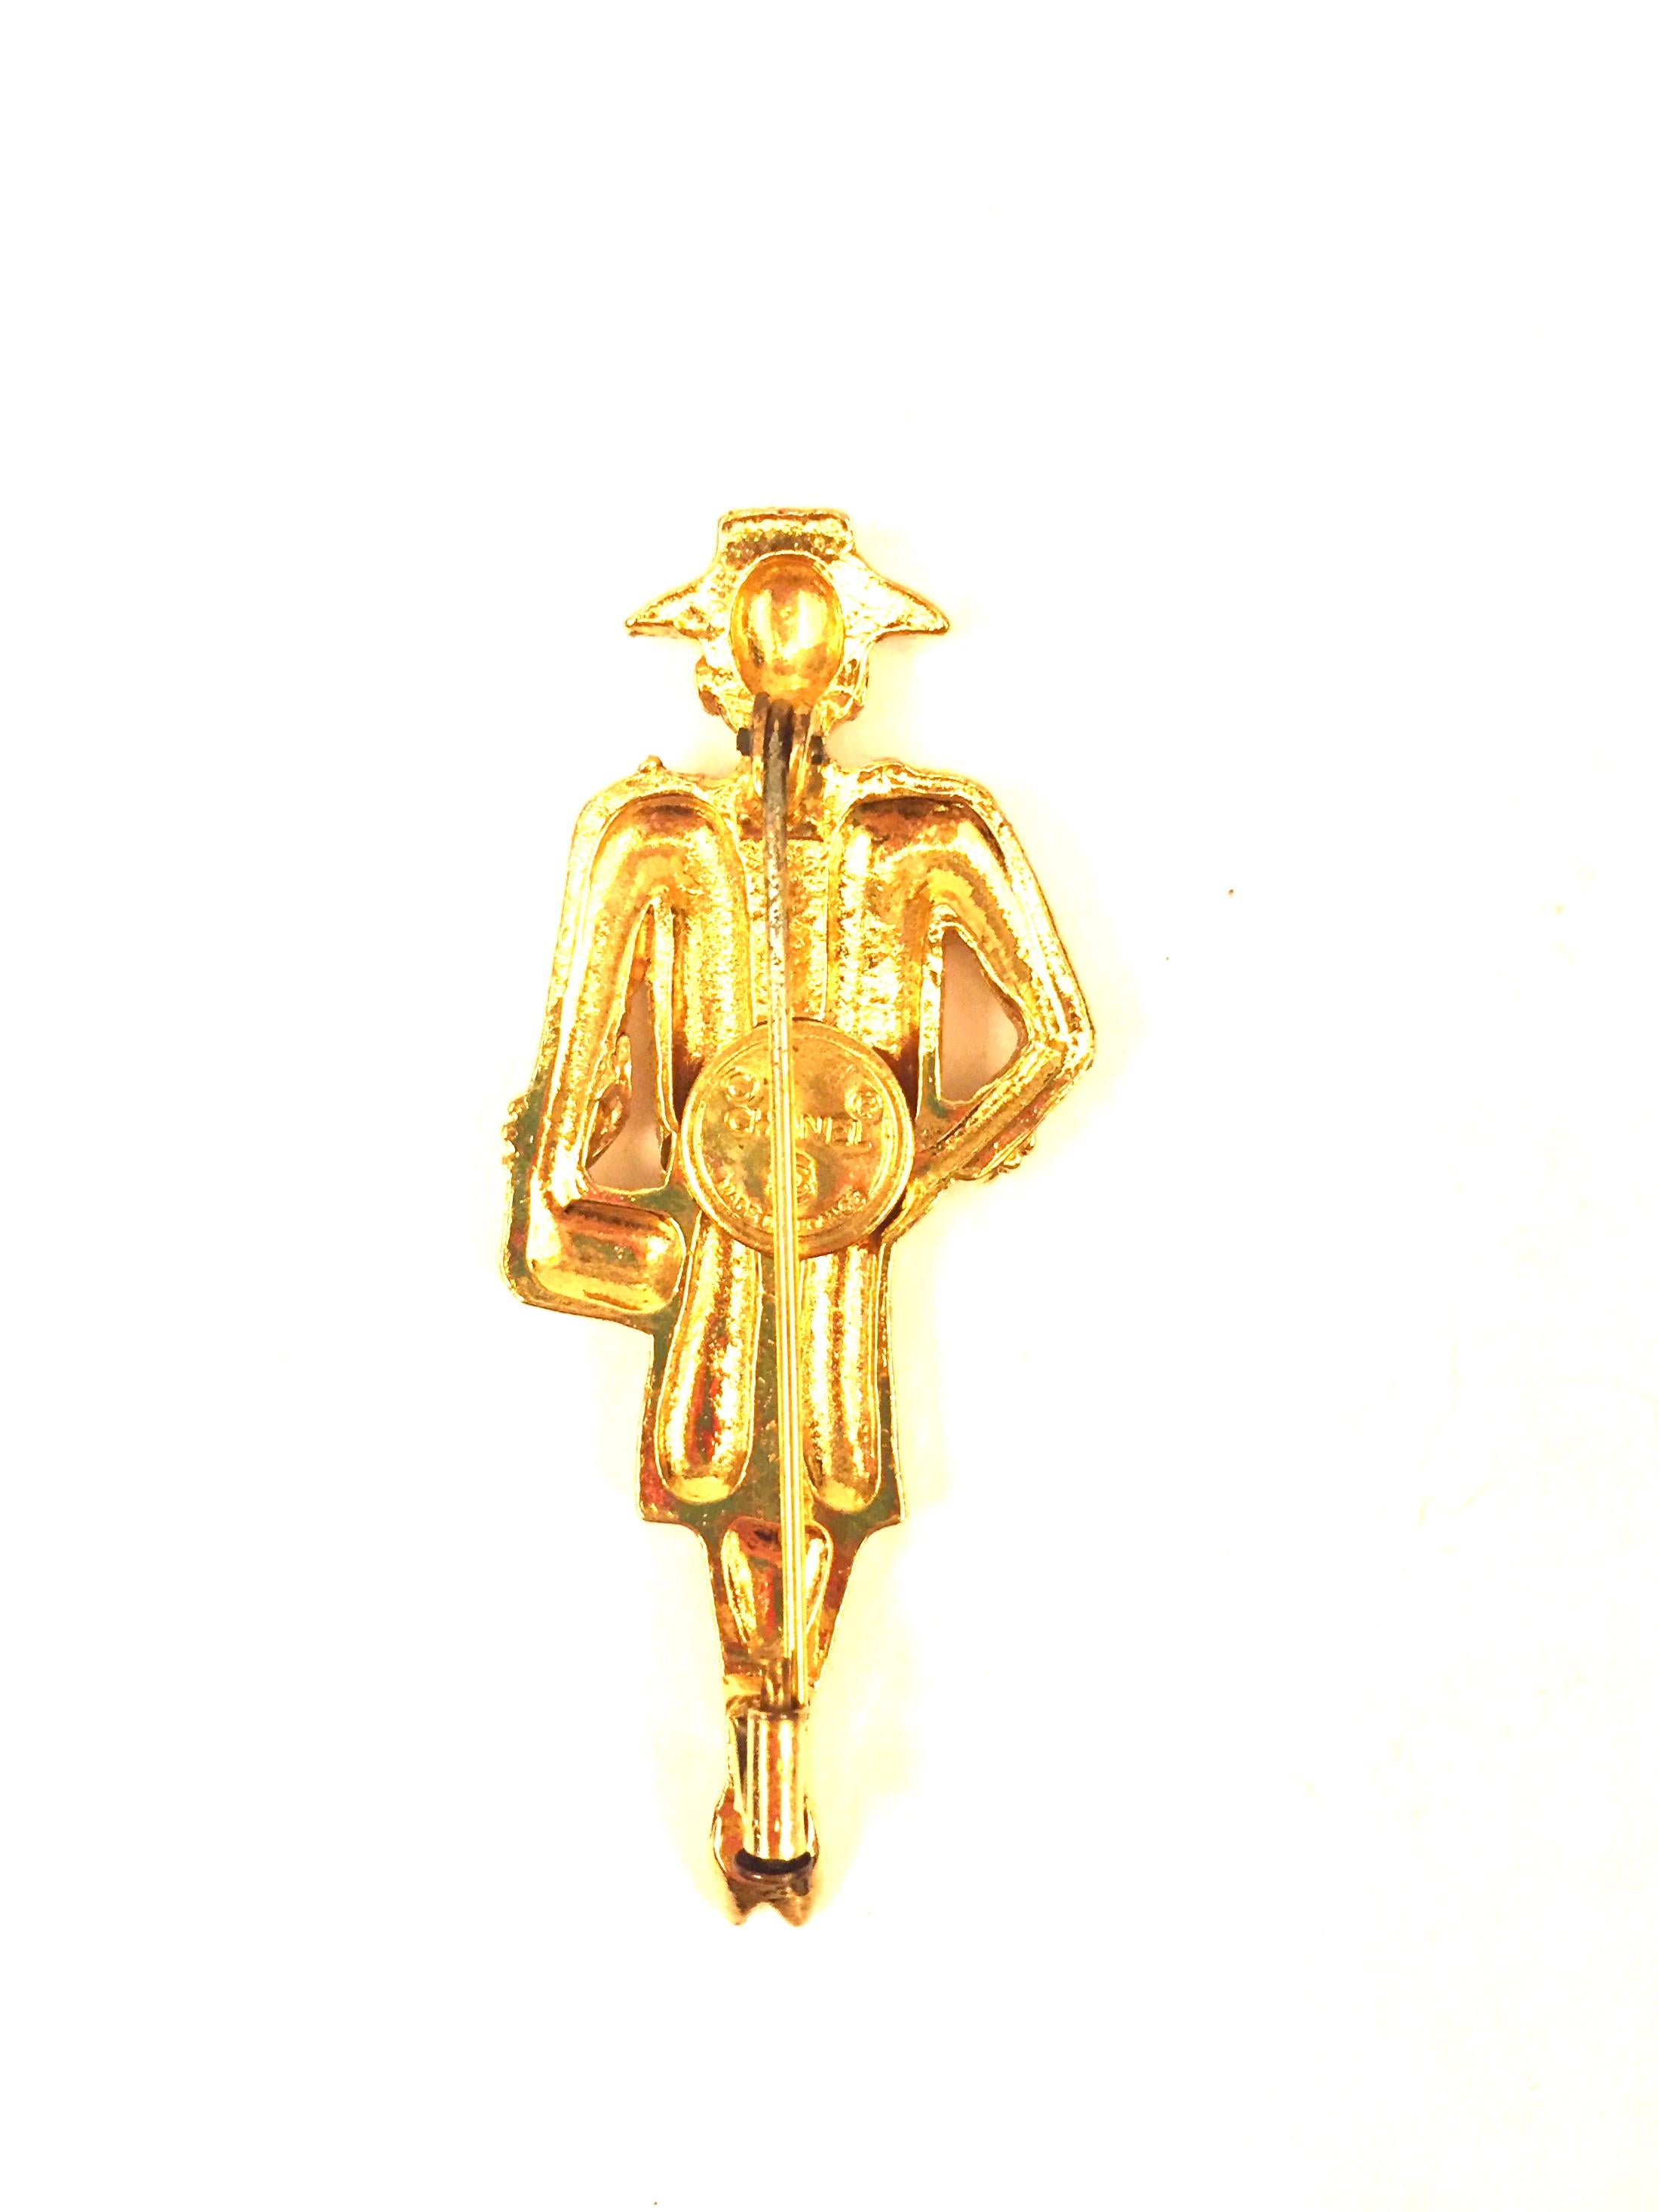 - VIntage 90s Coco Chanel gold plated brooch. Rare and gorgeous brooch. 

- Measurements: 6cm x 2.5cm  